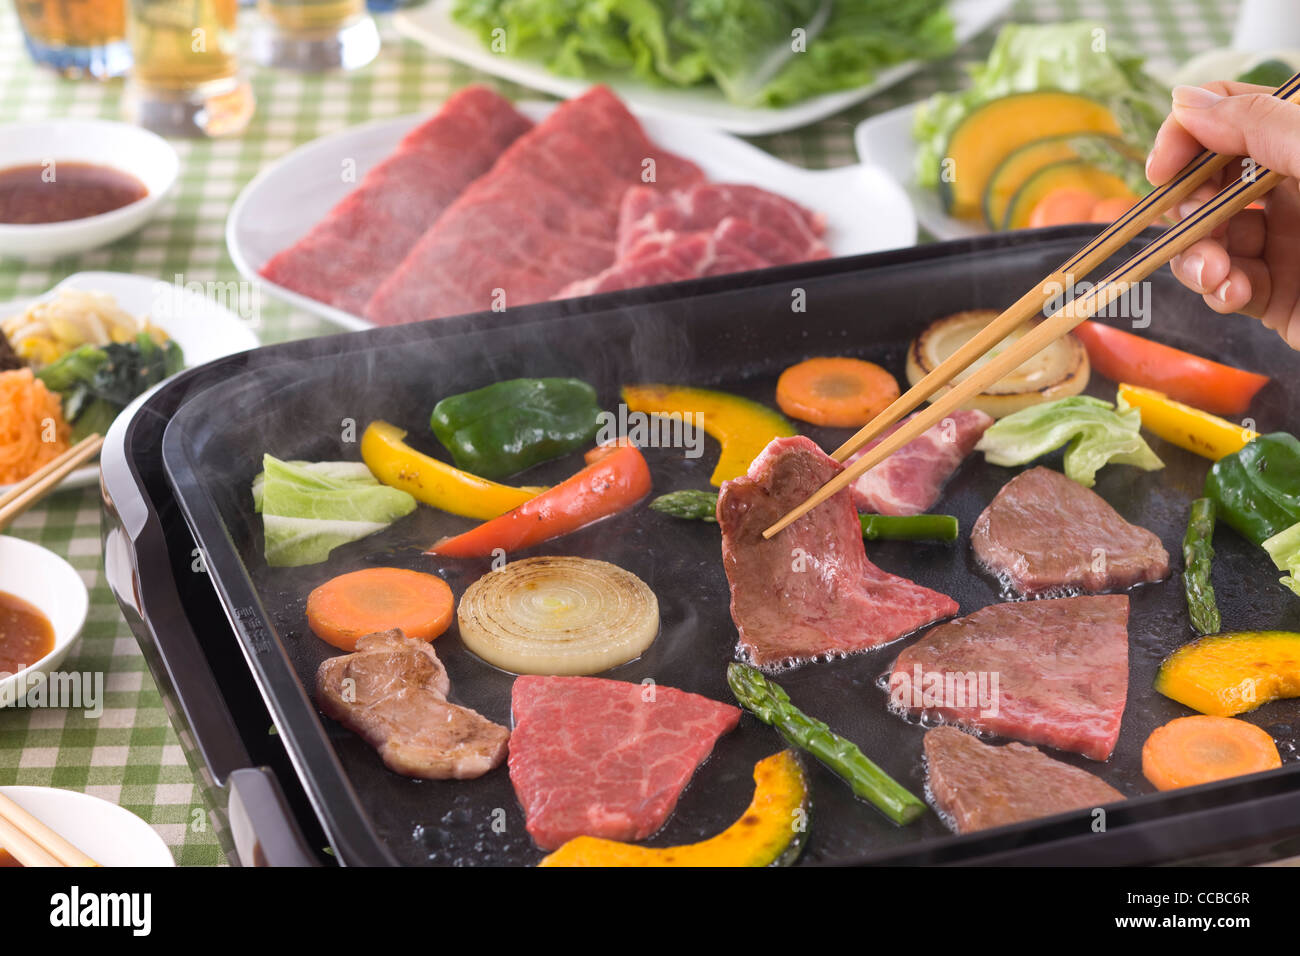 Grilled Beef on Hot Plate Stock Photo